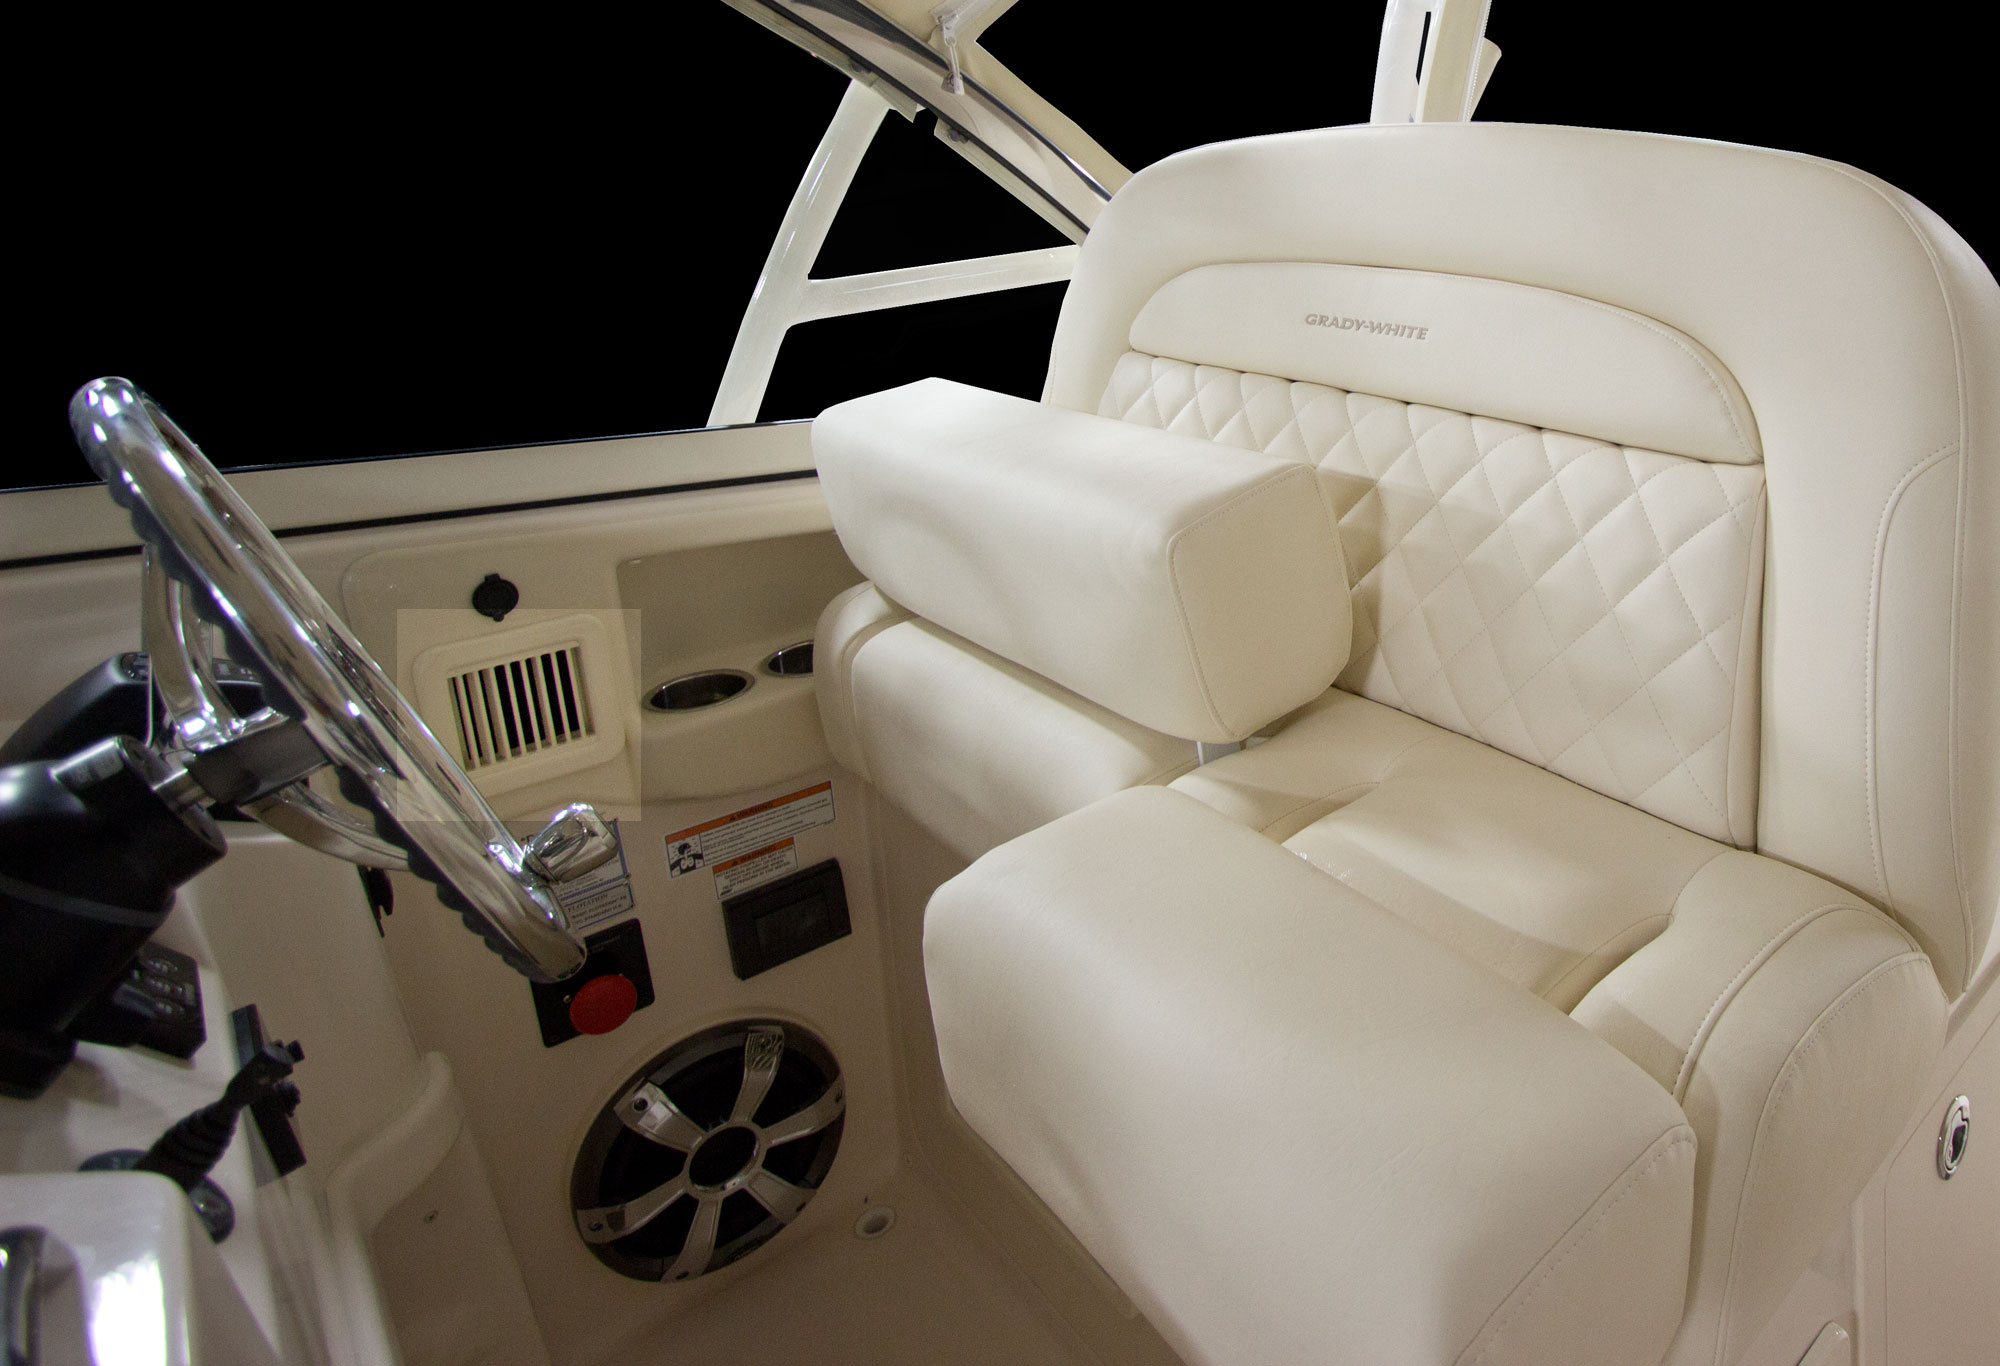 Grady-White Freedom 335 helm air conditioning